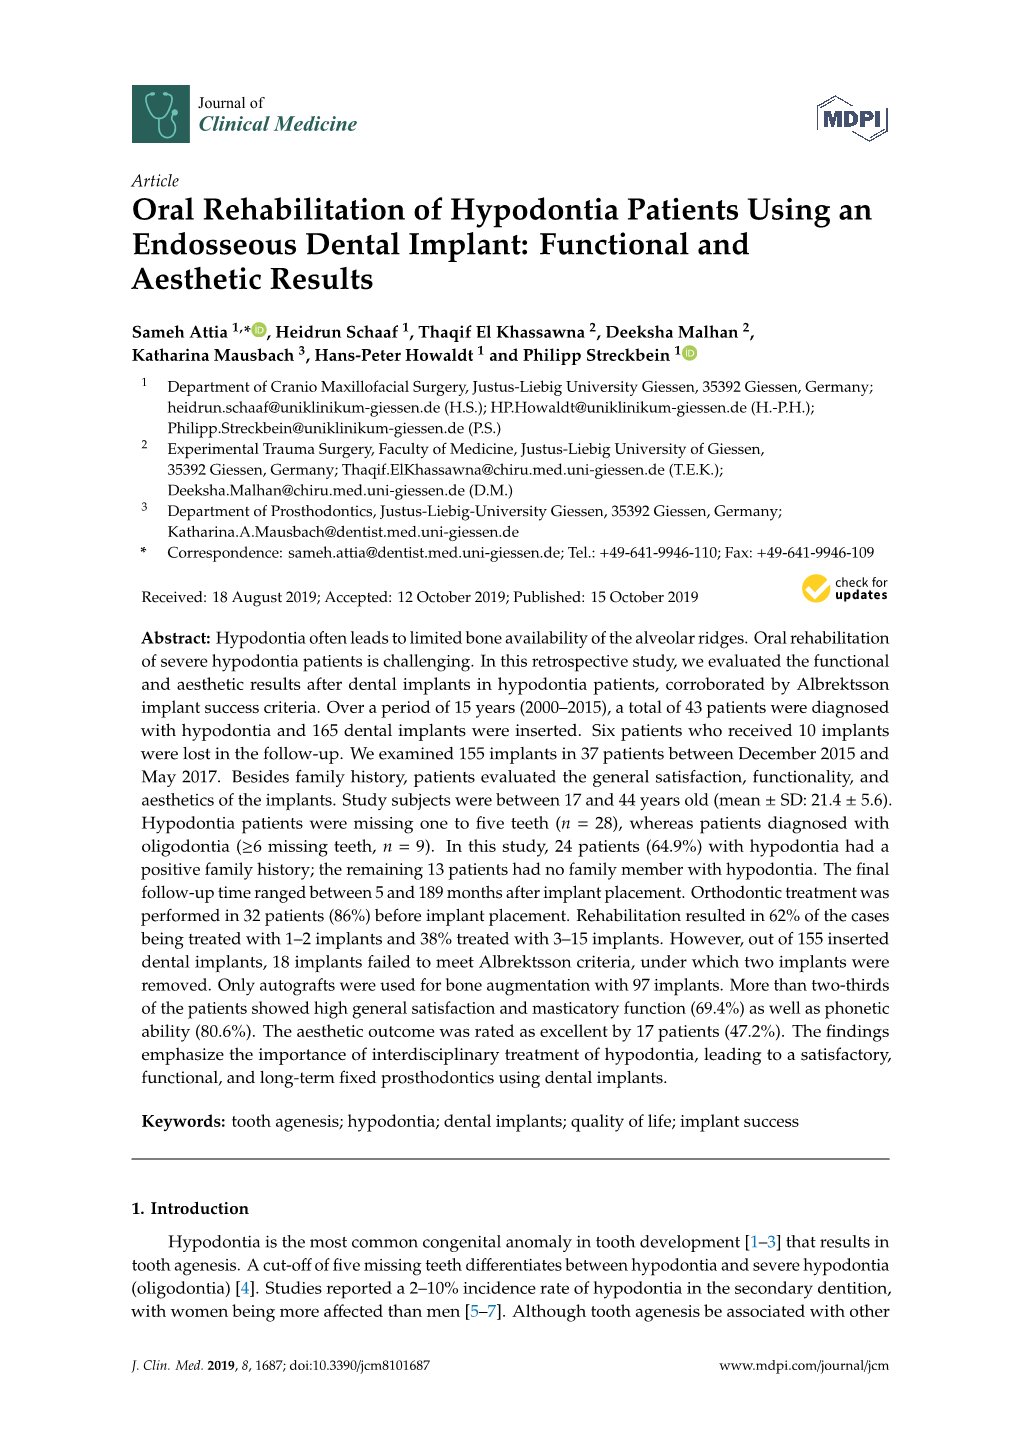 Oral Rehabilitation of Hypodontia Patients Using an Endosseous Dental Implant: Functional and Aesthetic Results